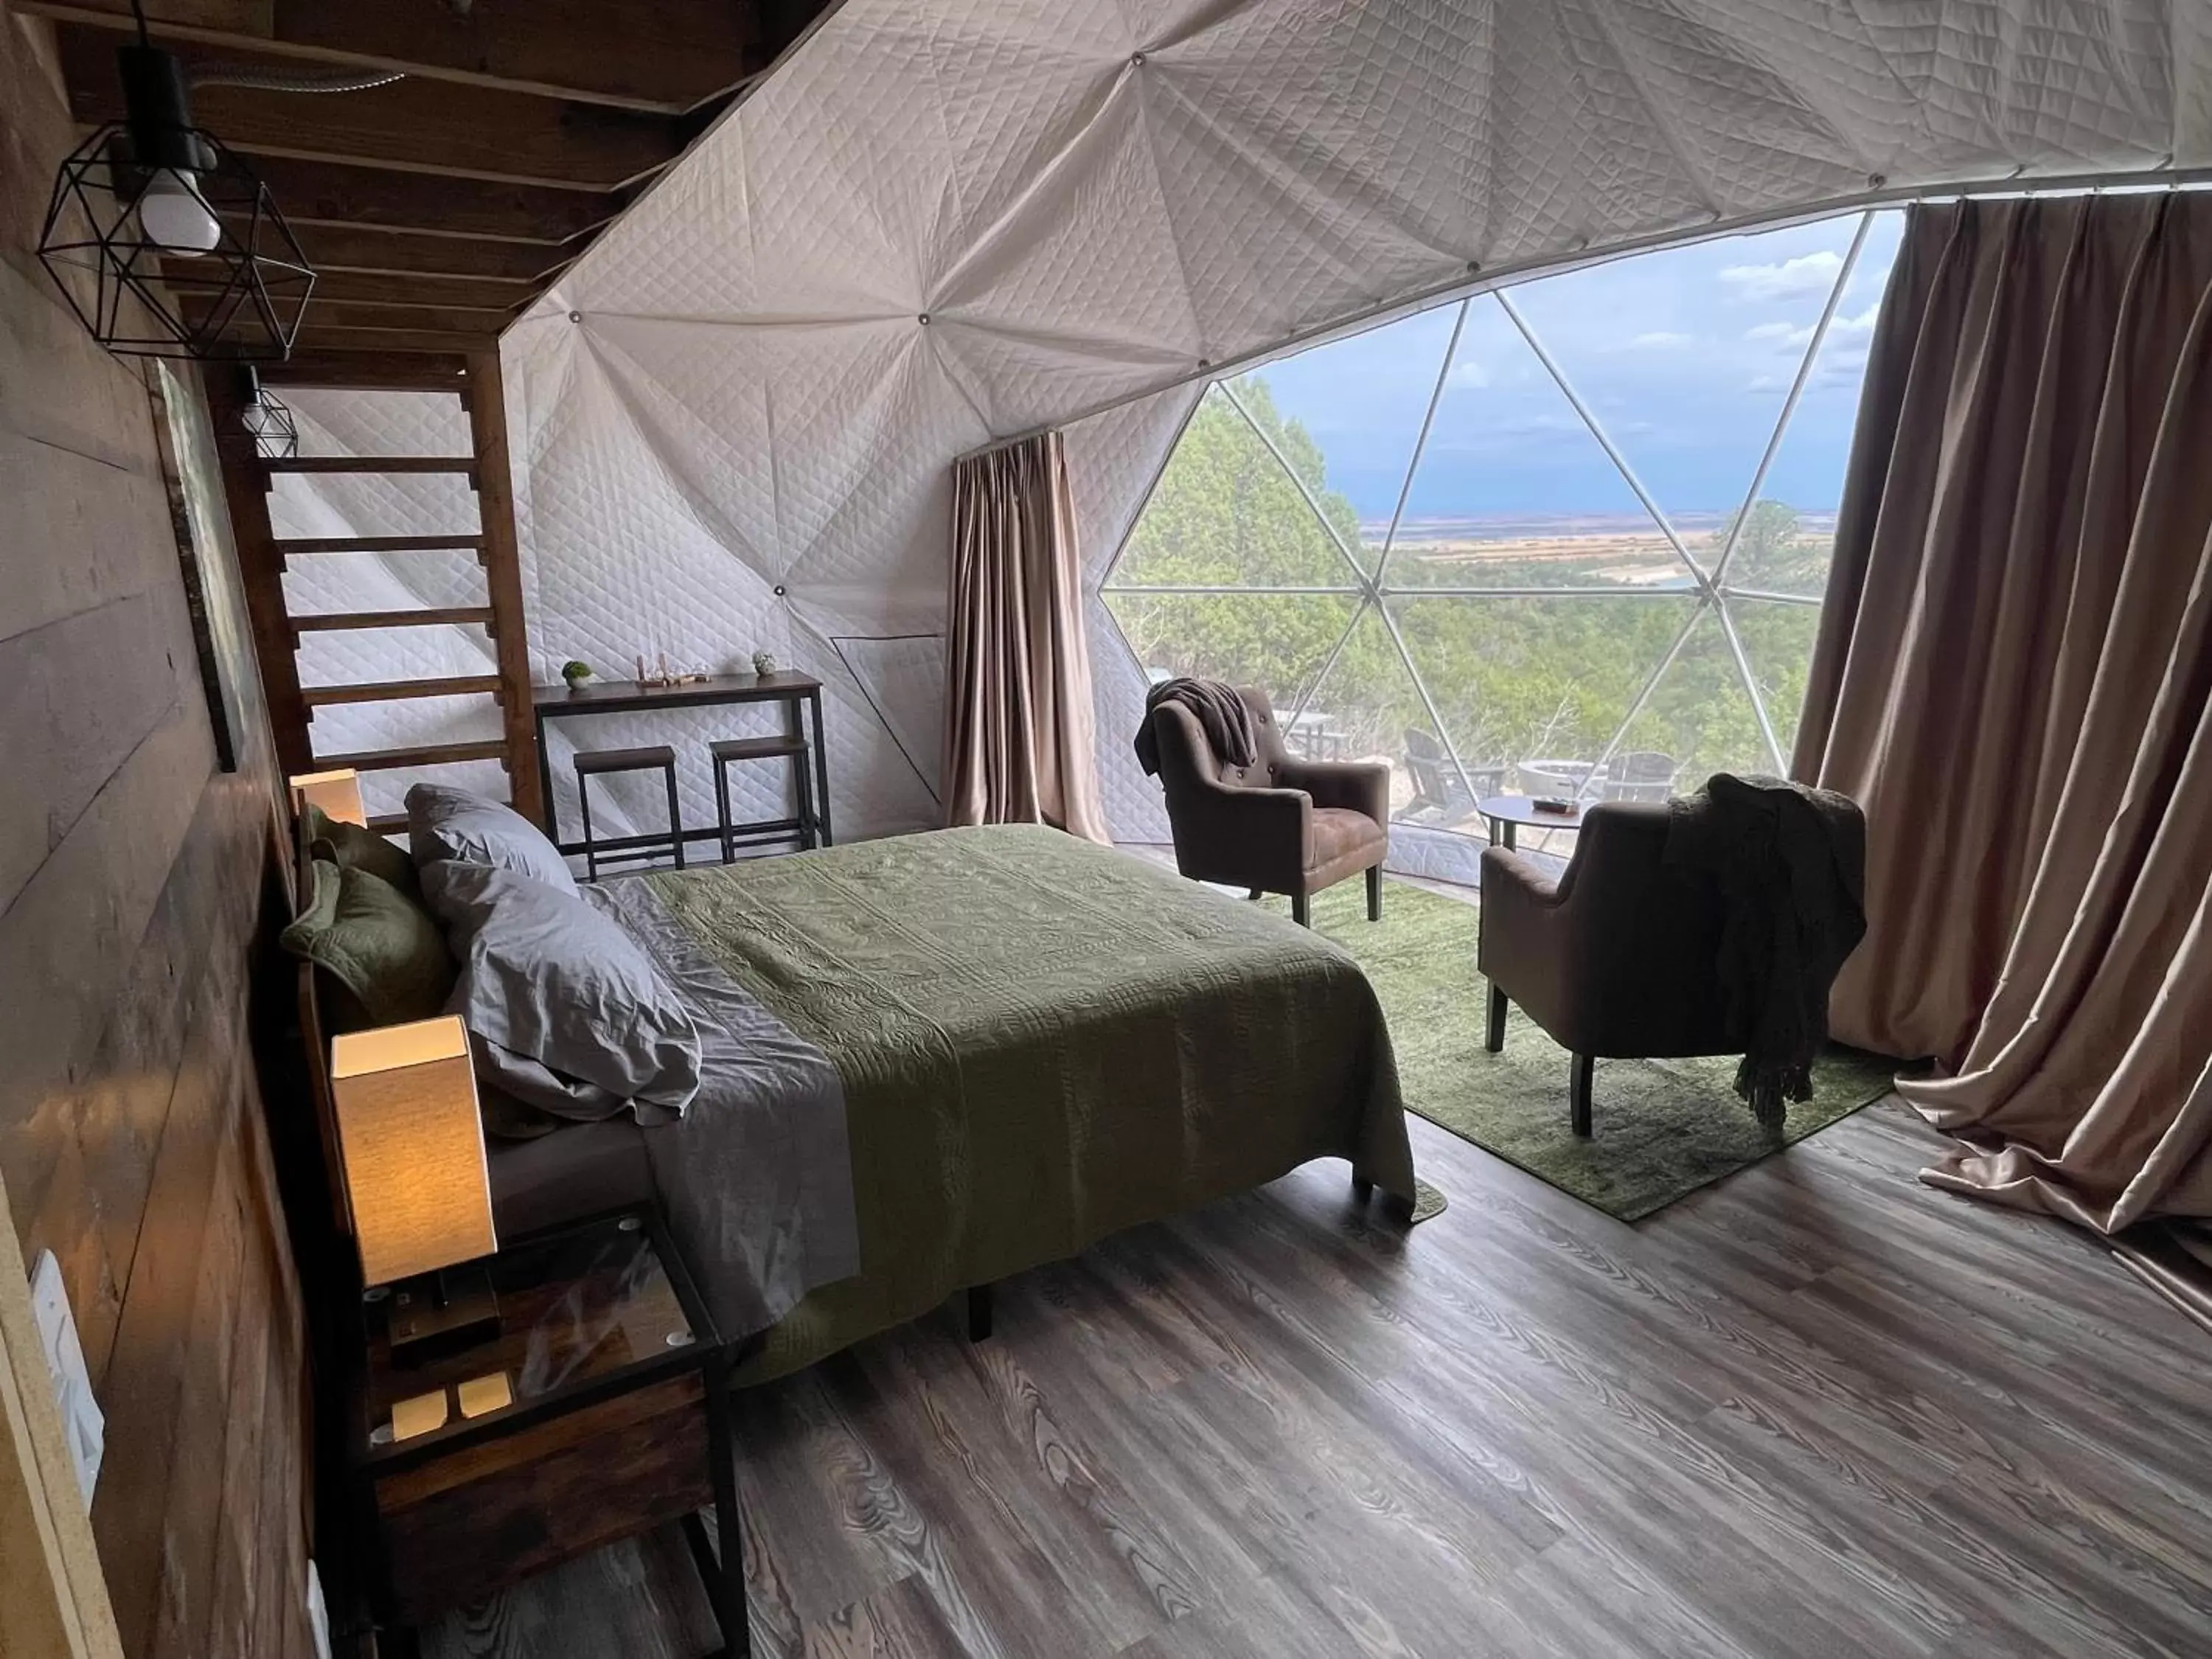 View (from property/room) in Canyon Rim Domes - A Luxury Glamping Experience!!